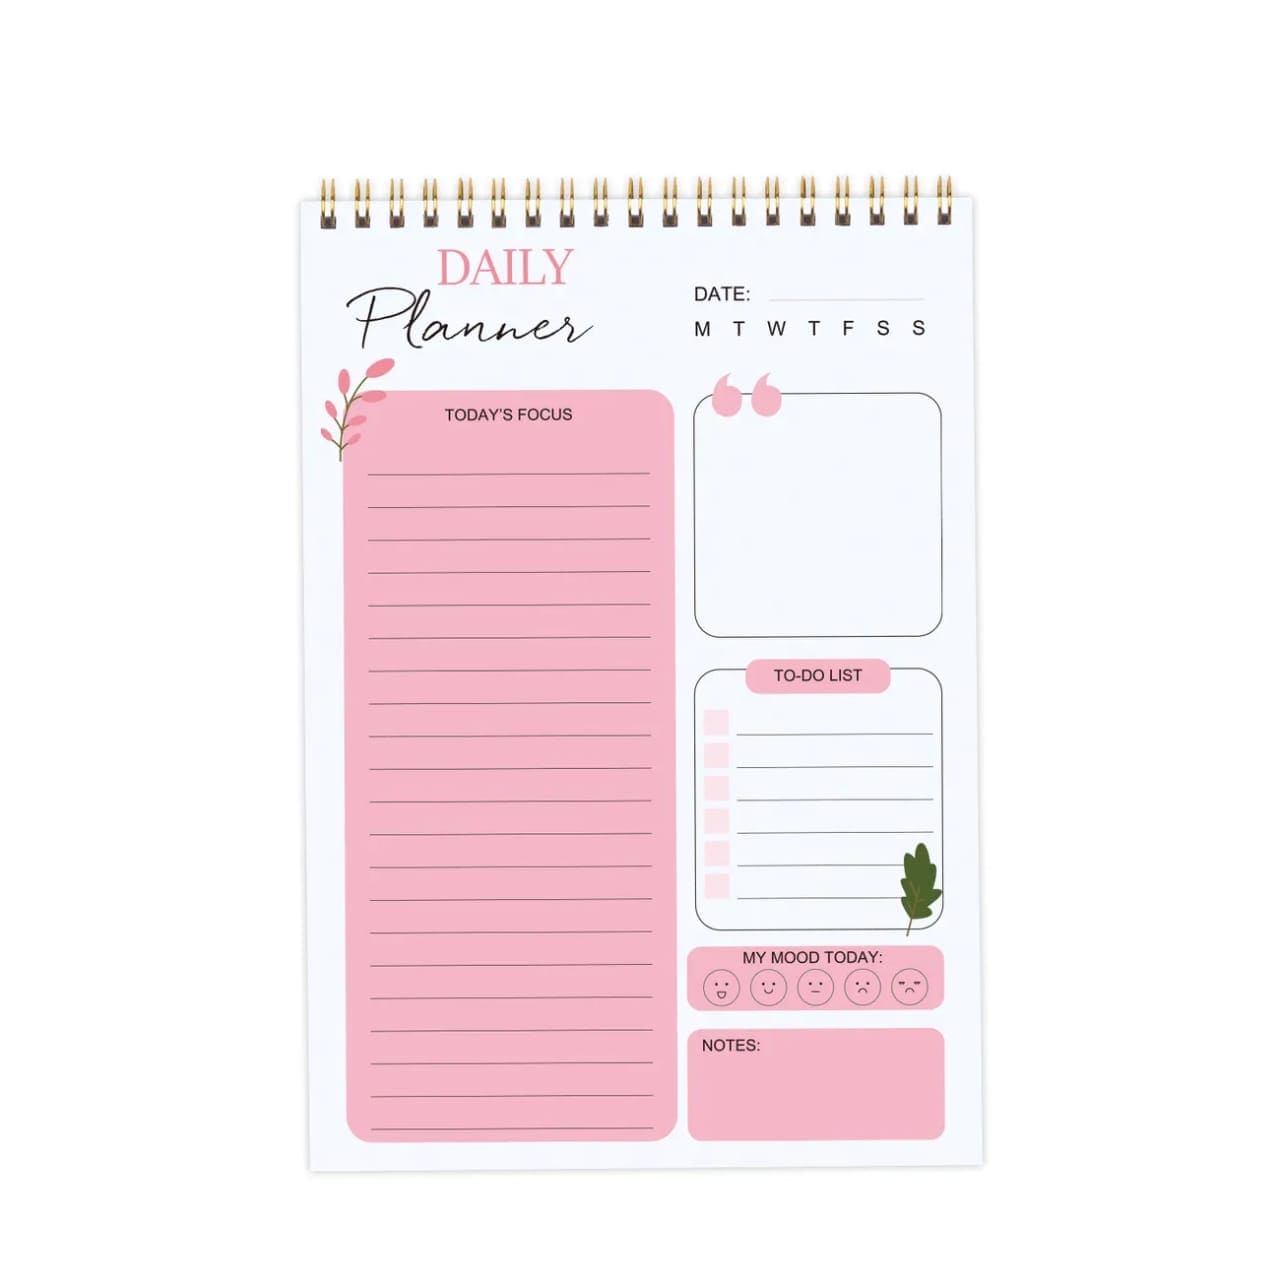 shah and company mumbai Daily Planner Stay Organized with Our Spiral  Planner for Students - 60 Sheets Included